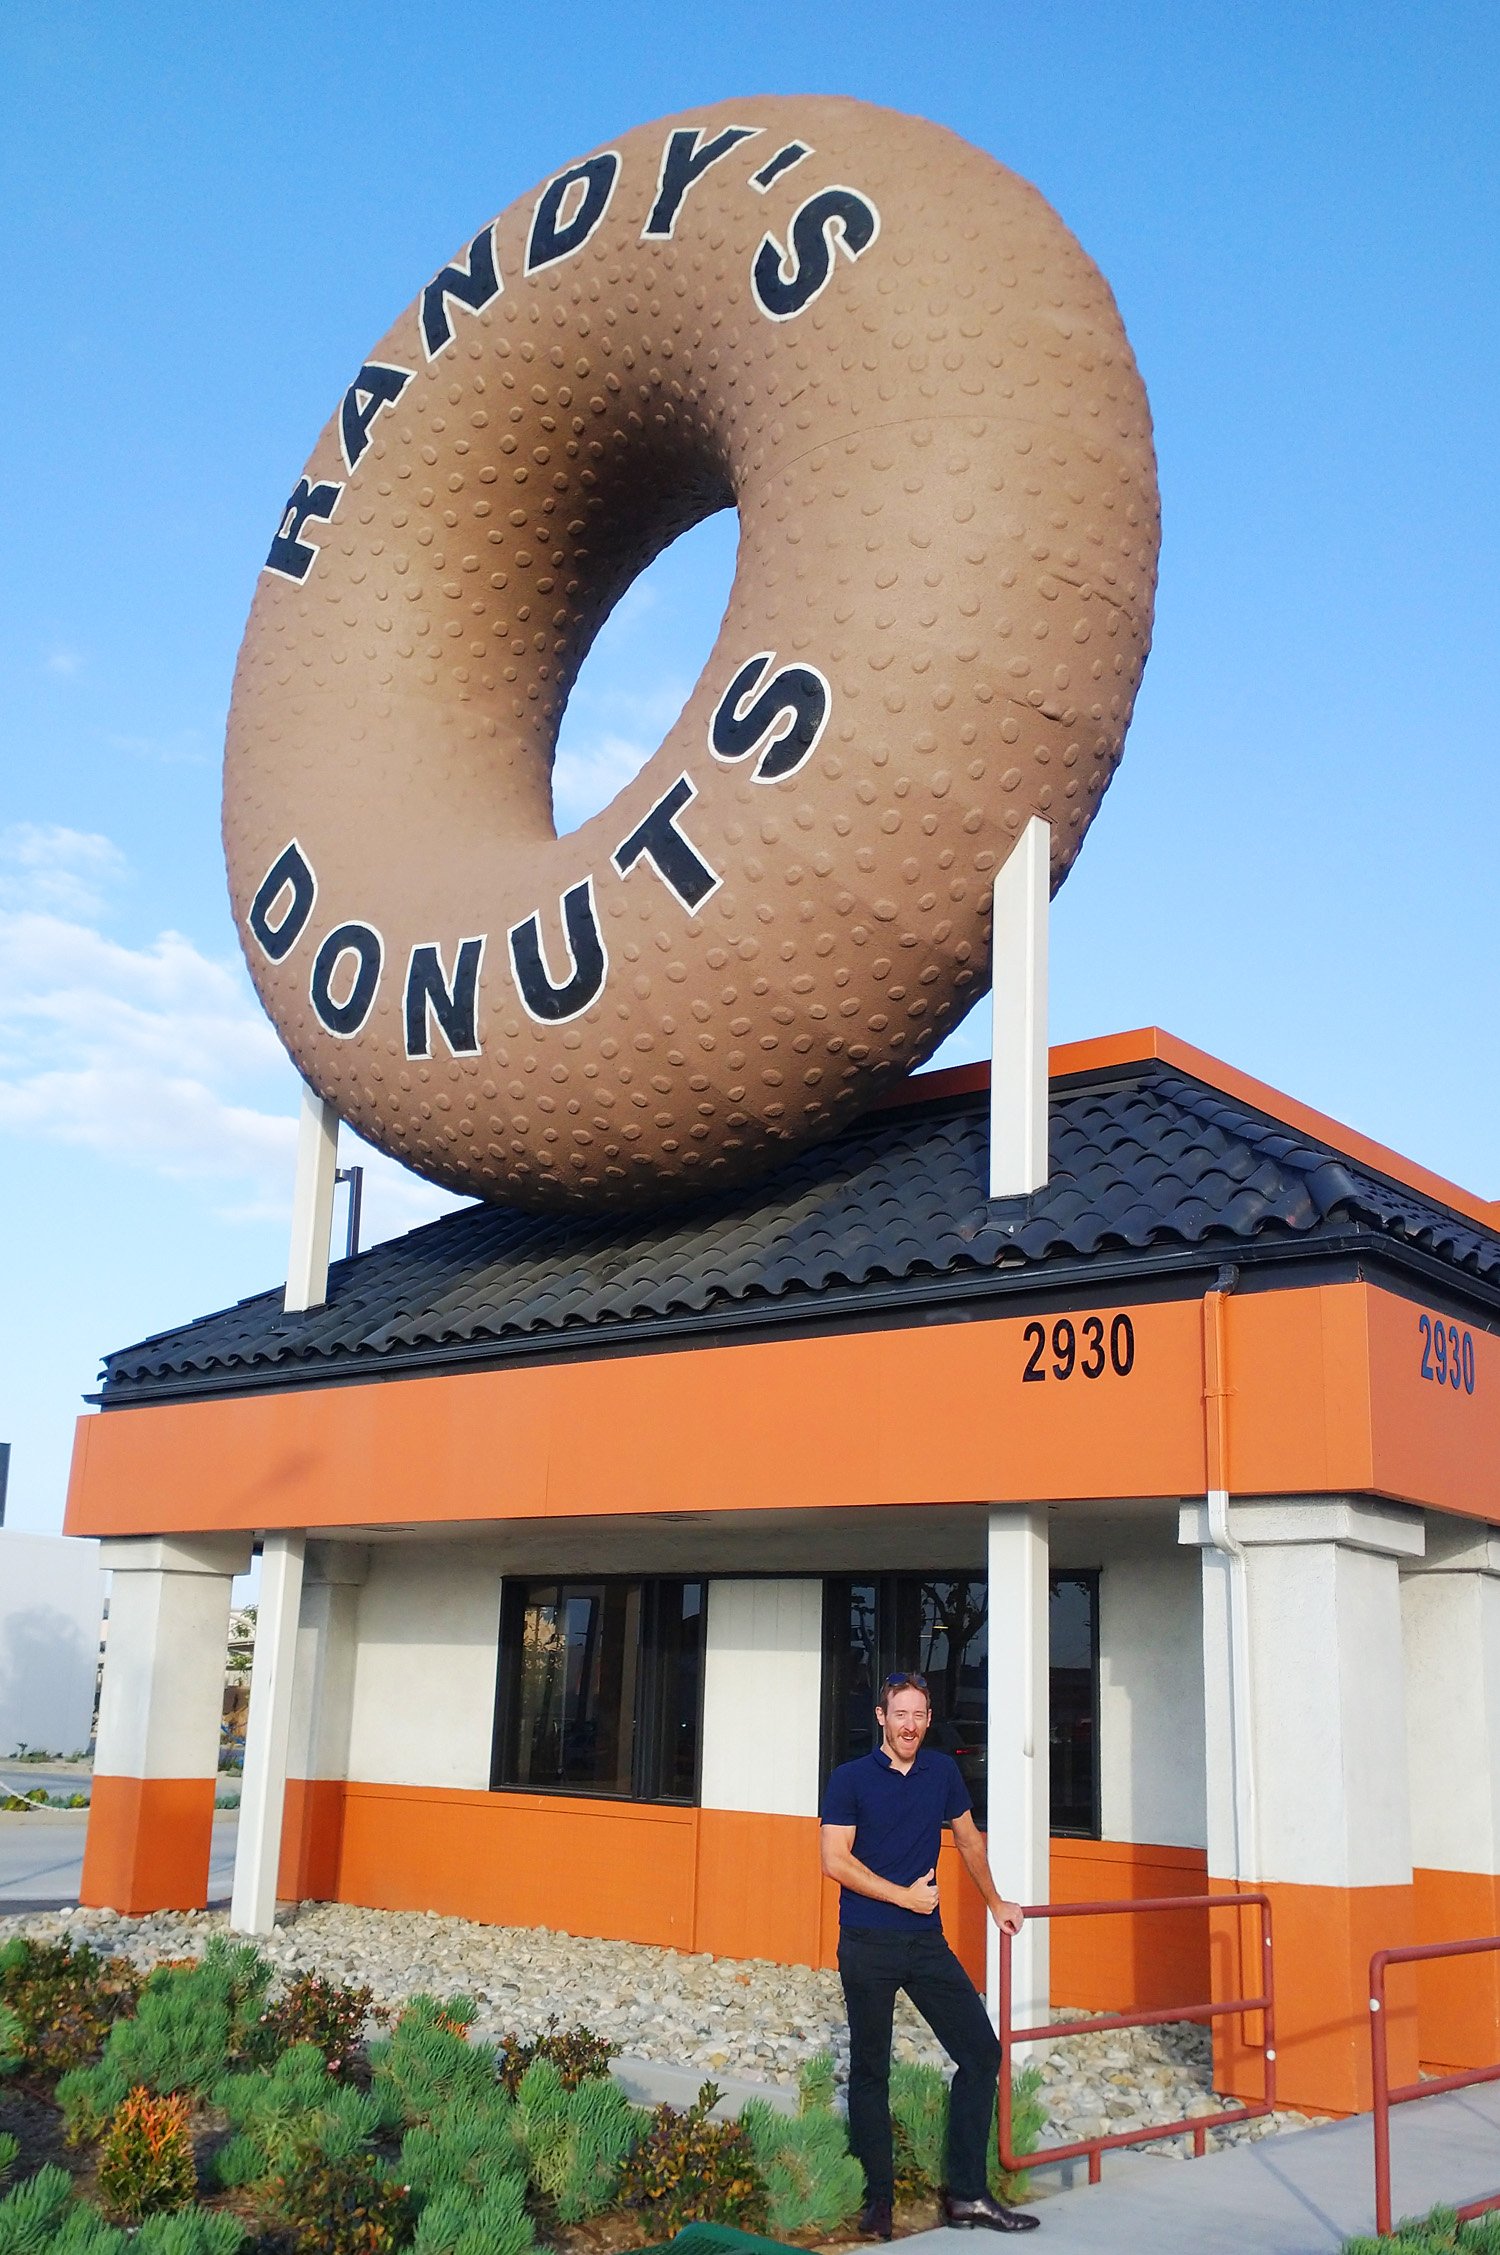 The famous Randy's Big Donut in Costa Mesa. 